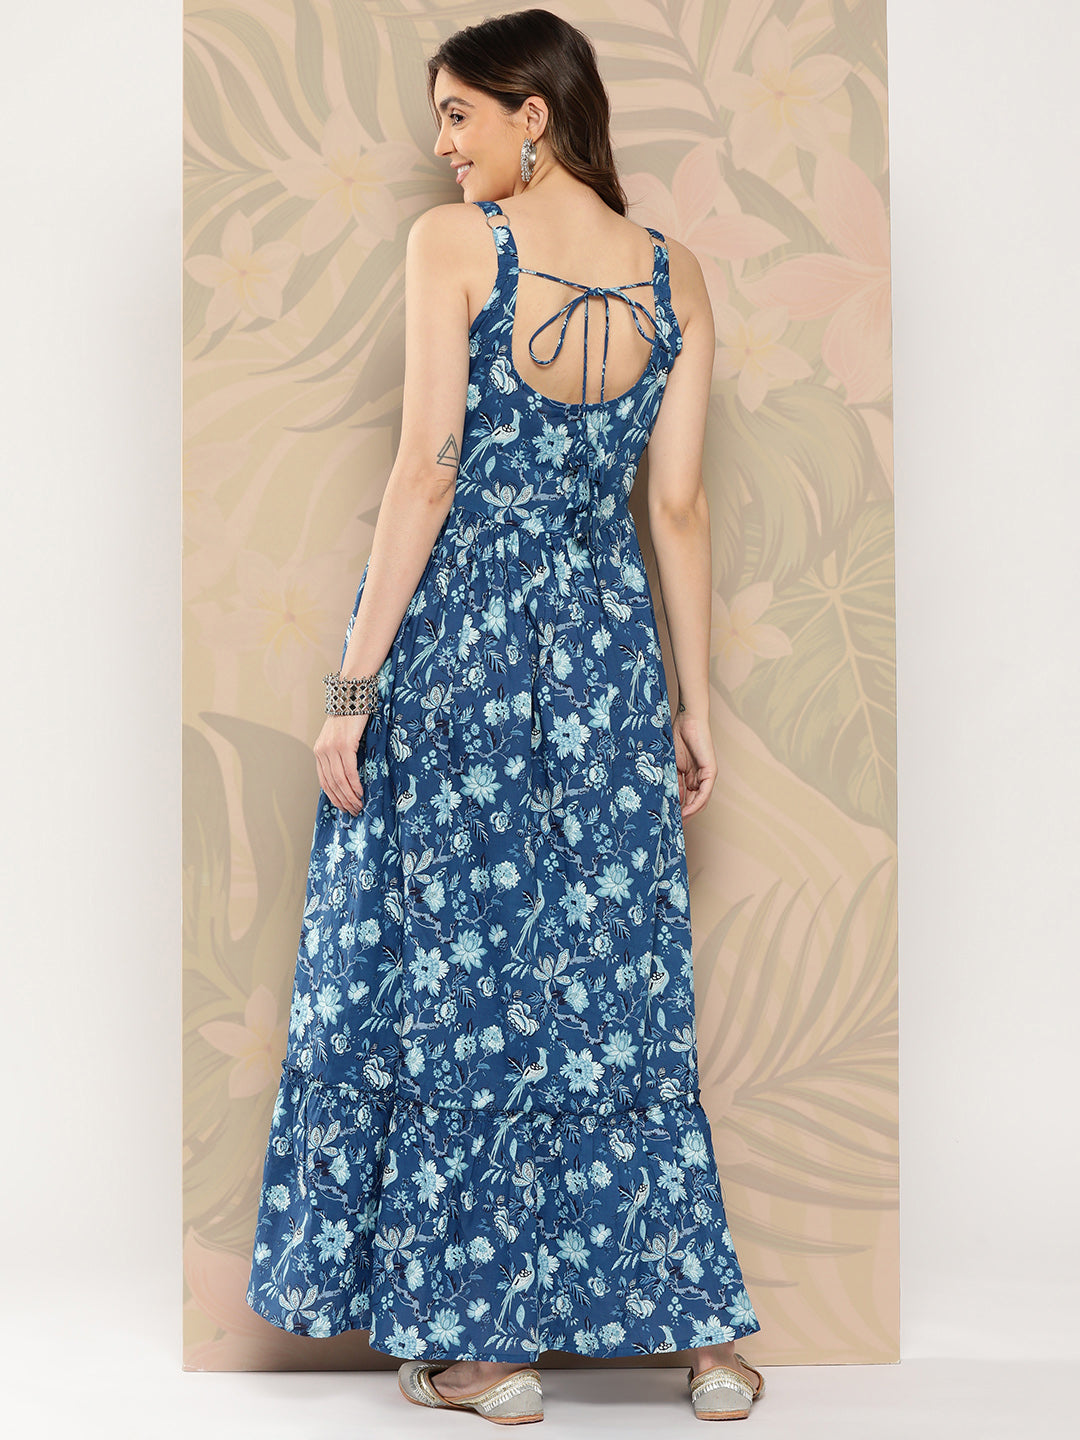 Women's Blue Abstract Printed Shoulder Strap Dress - Nayo Clothing